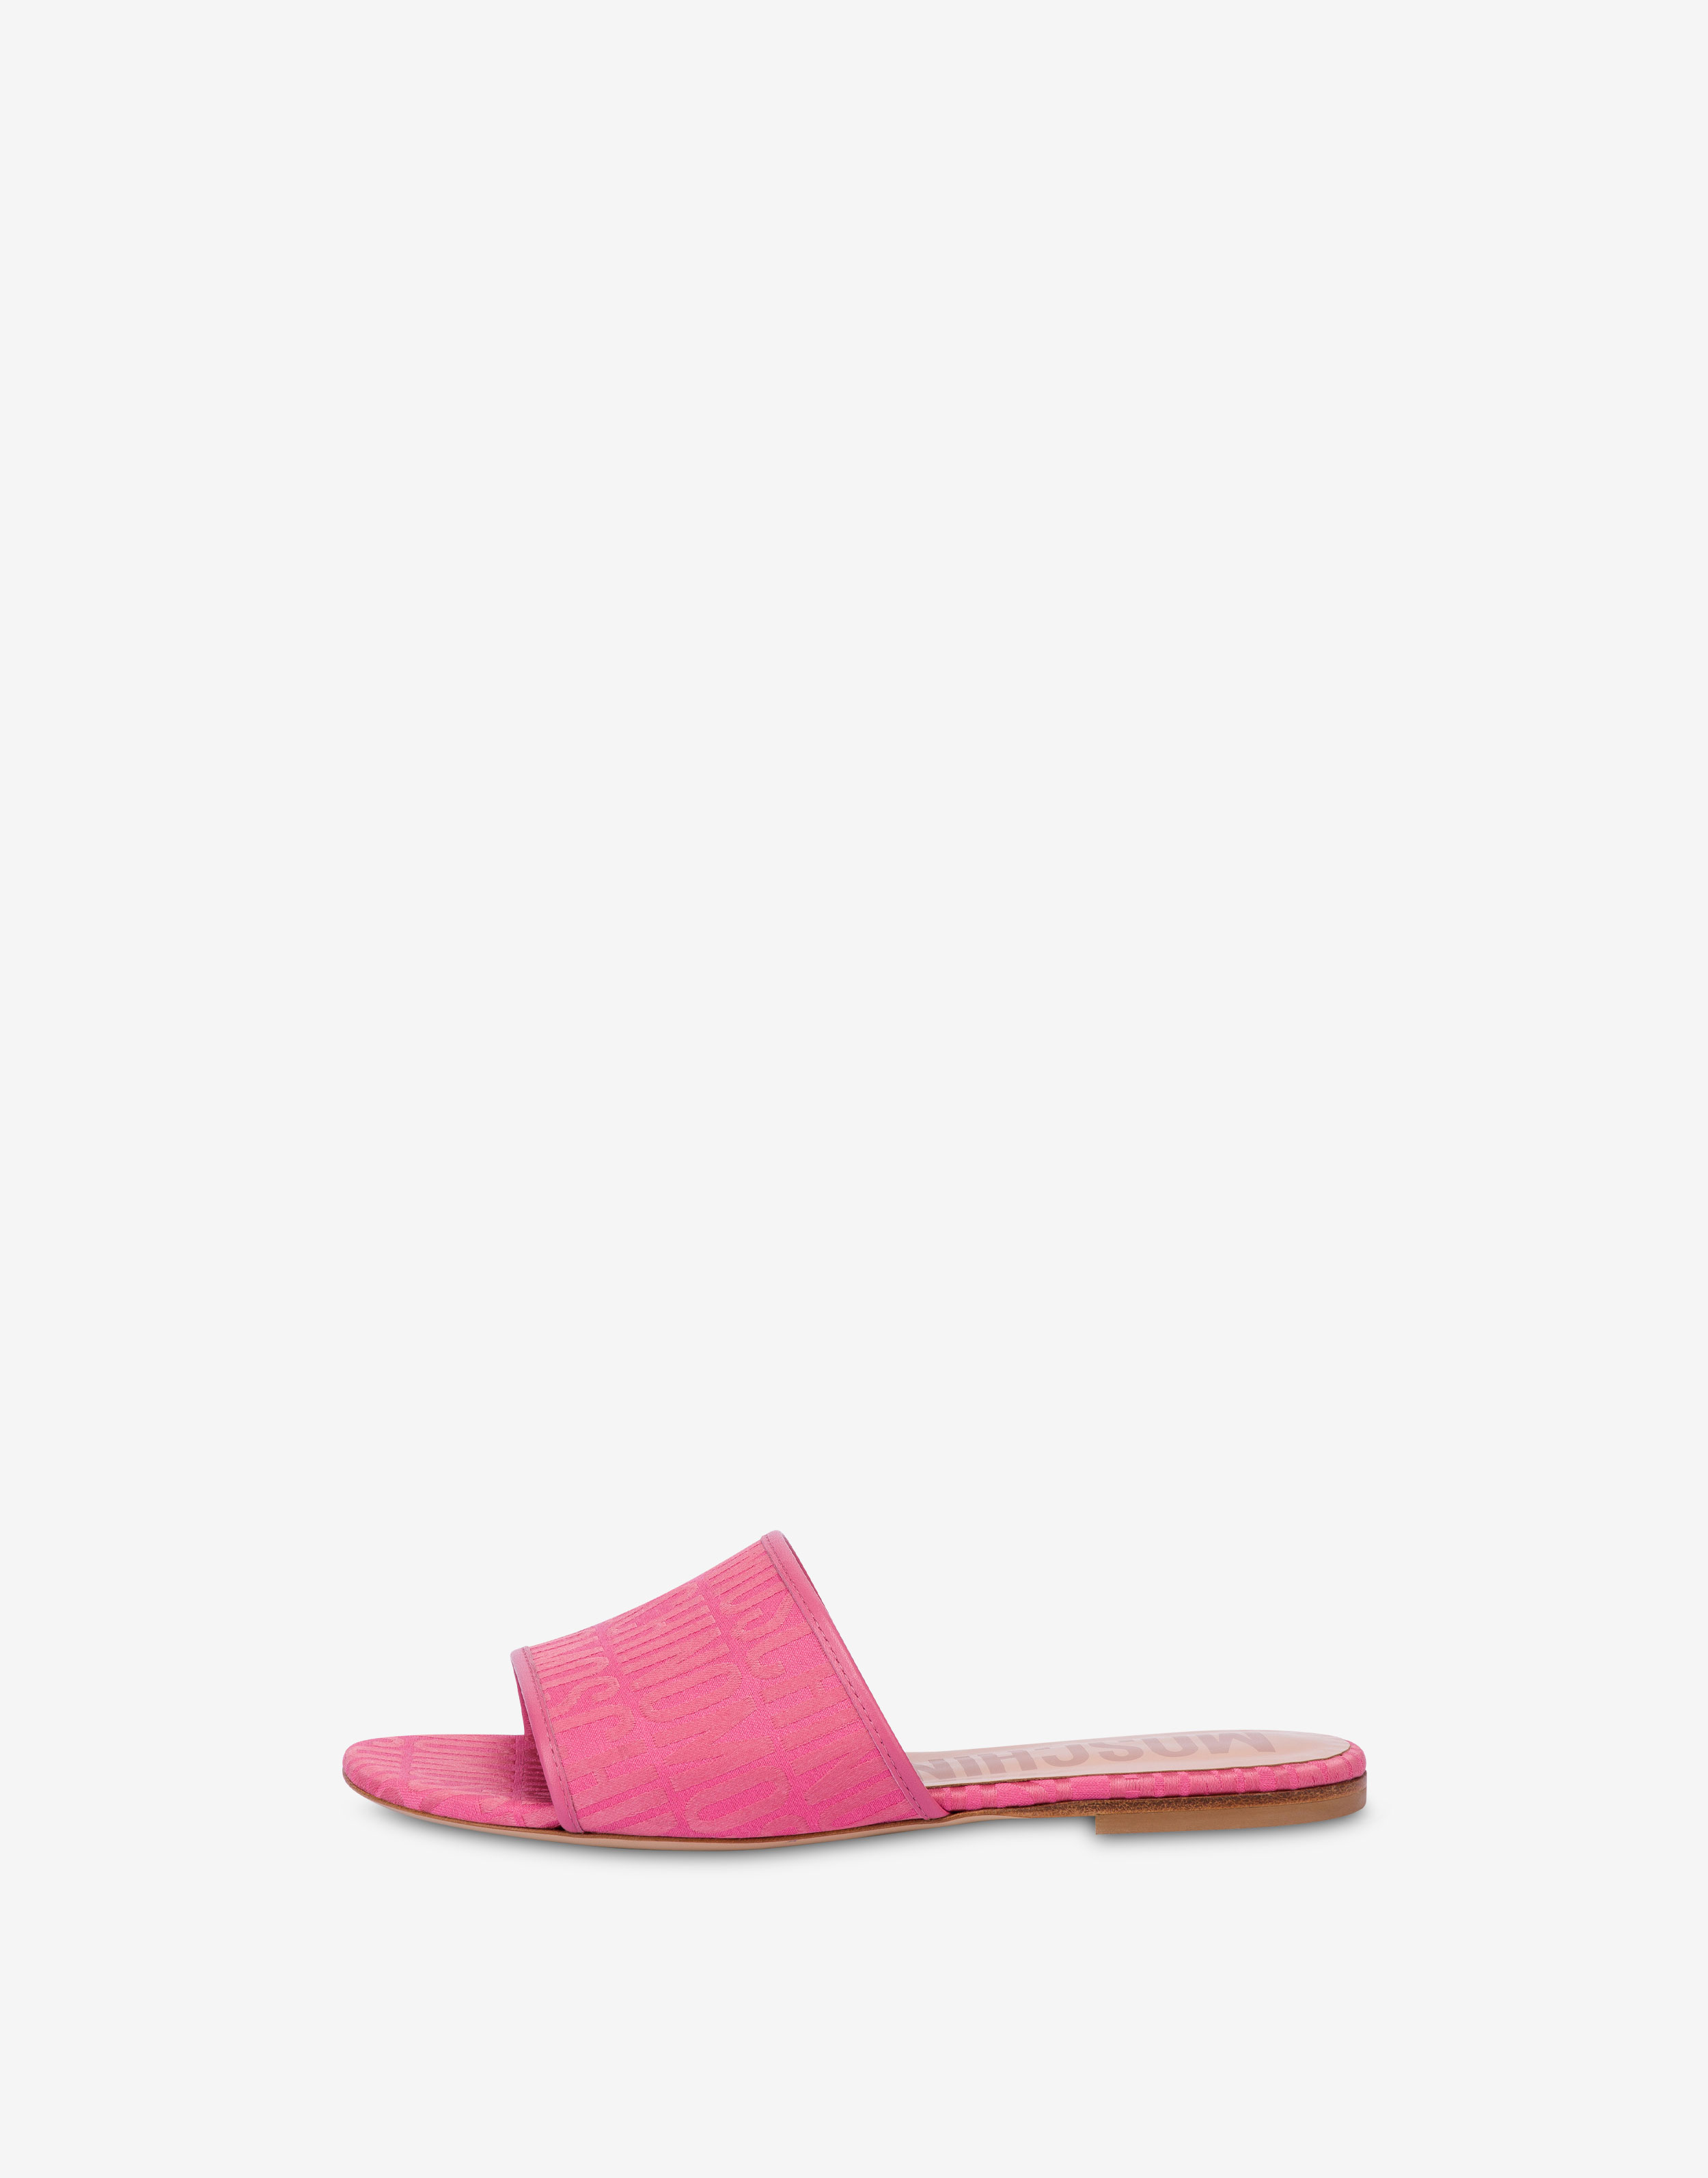 Mossimo Flat Sandals for Women